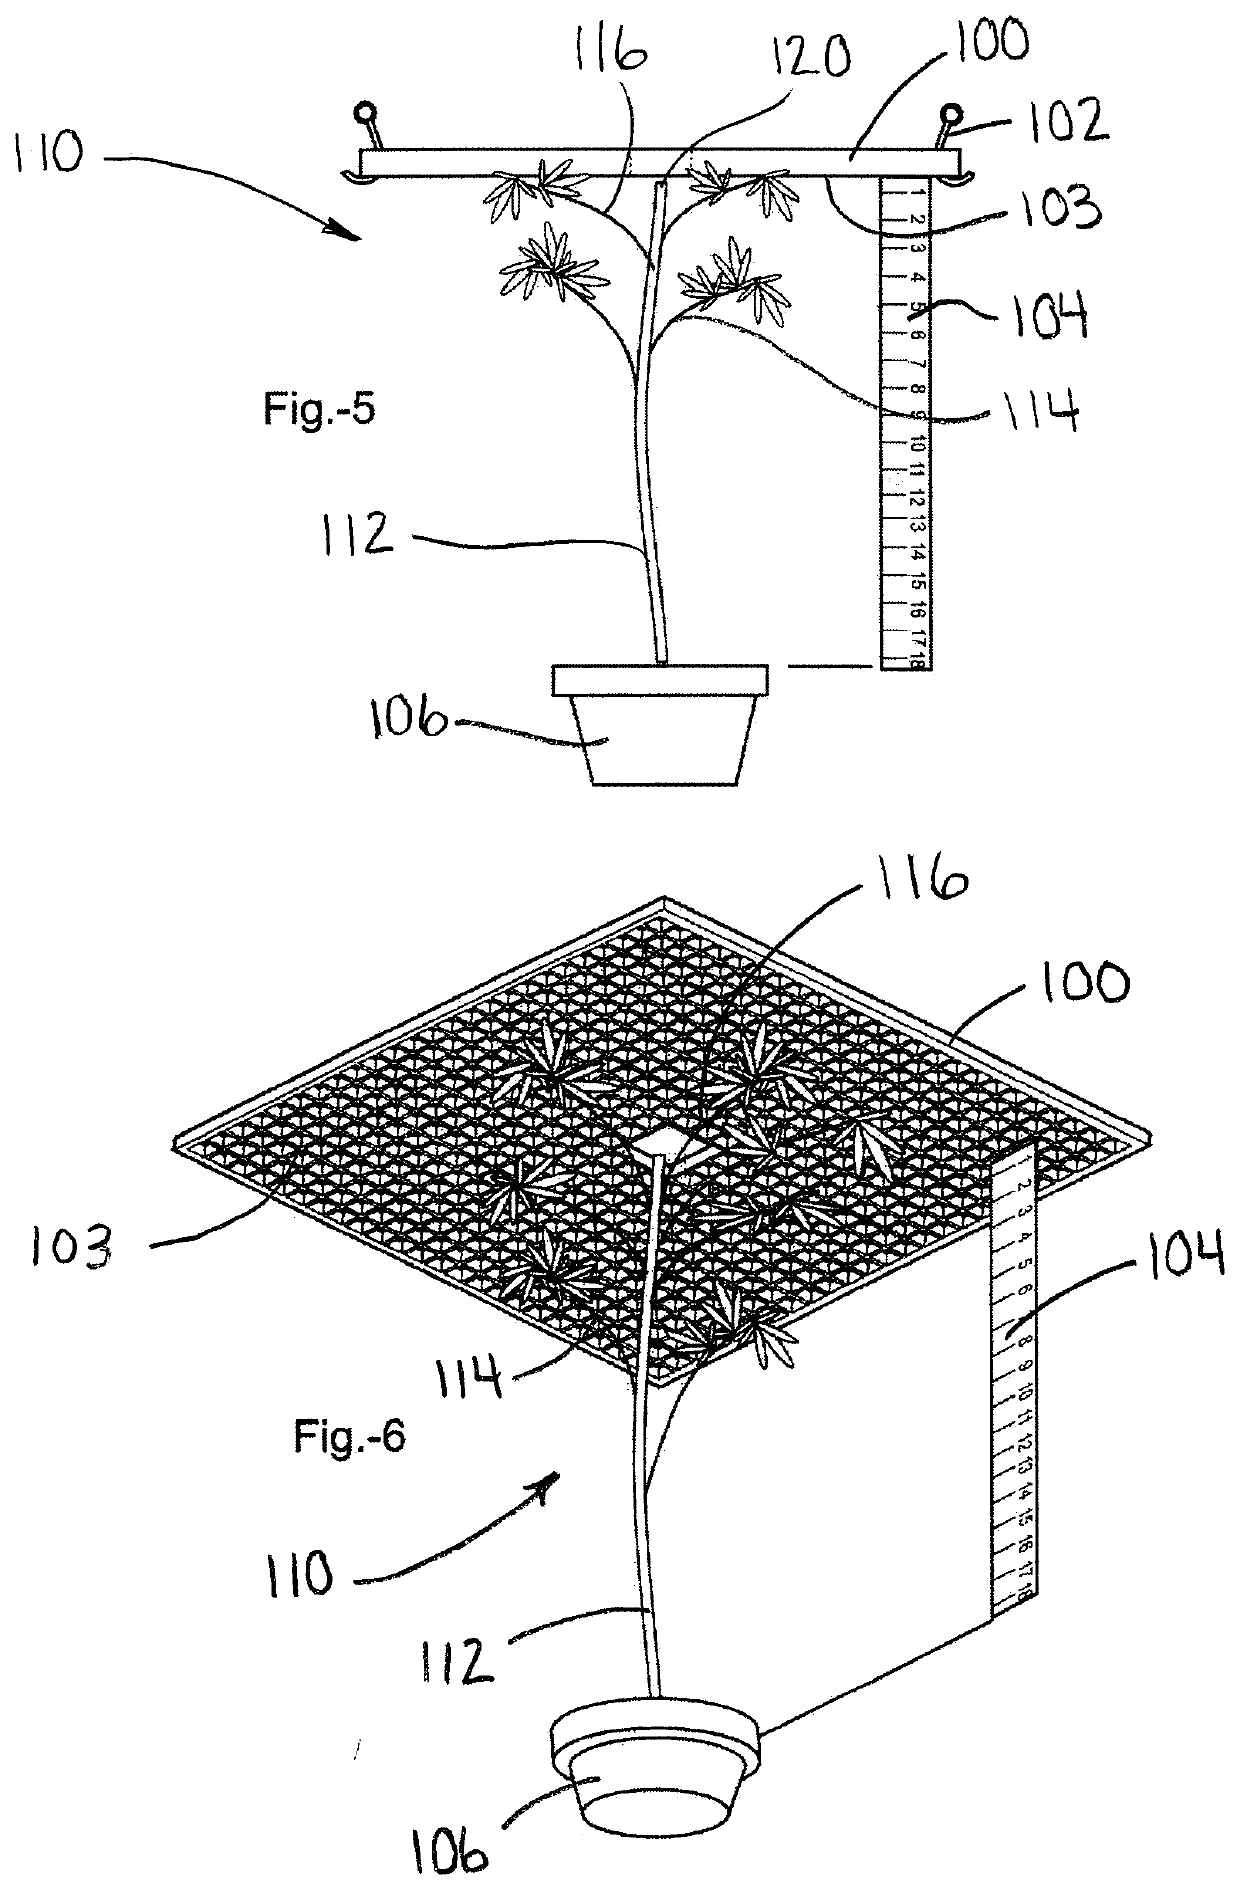 Method and Apparatus For Growing a Cannabis Plant